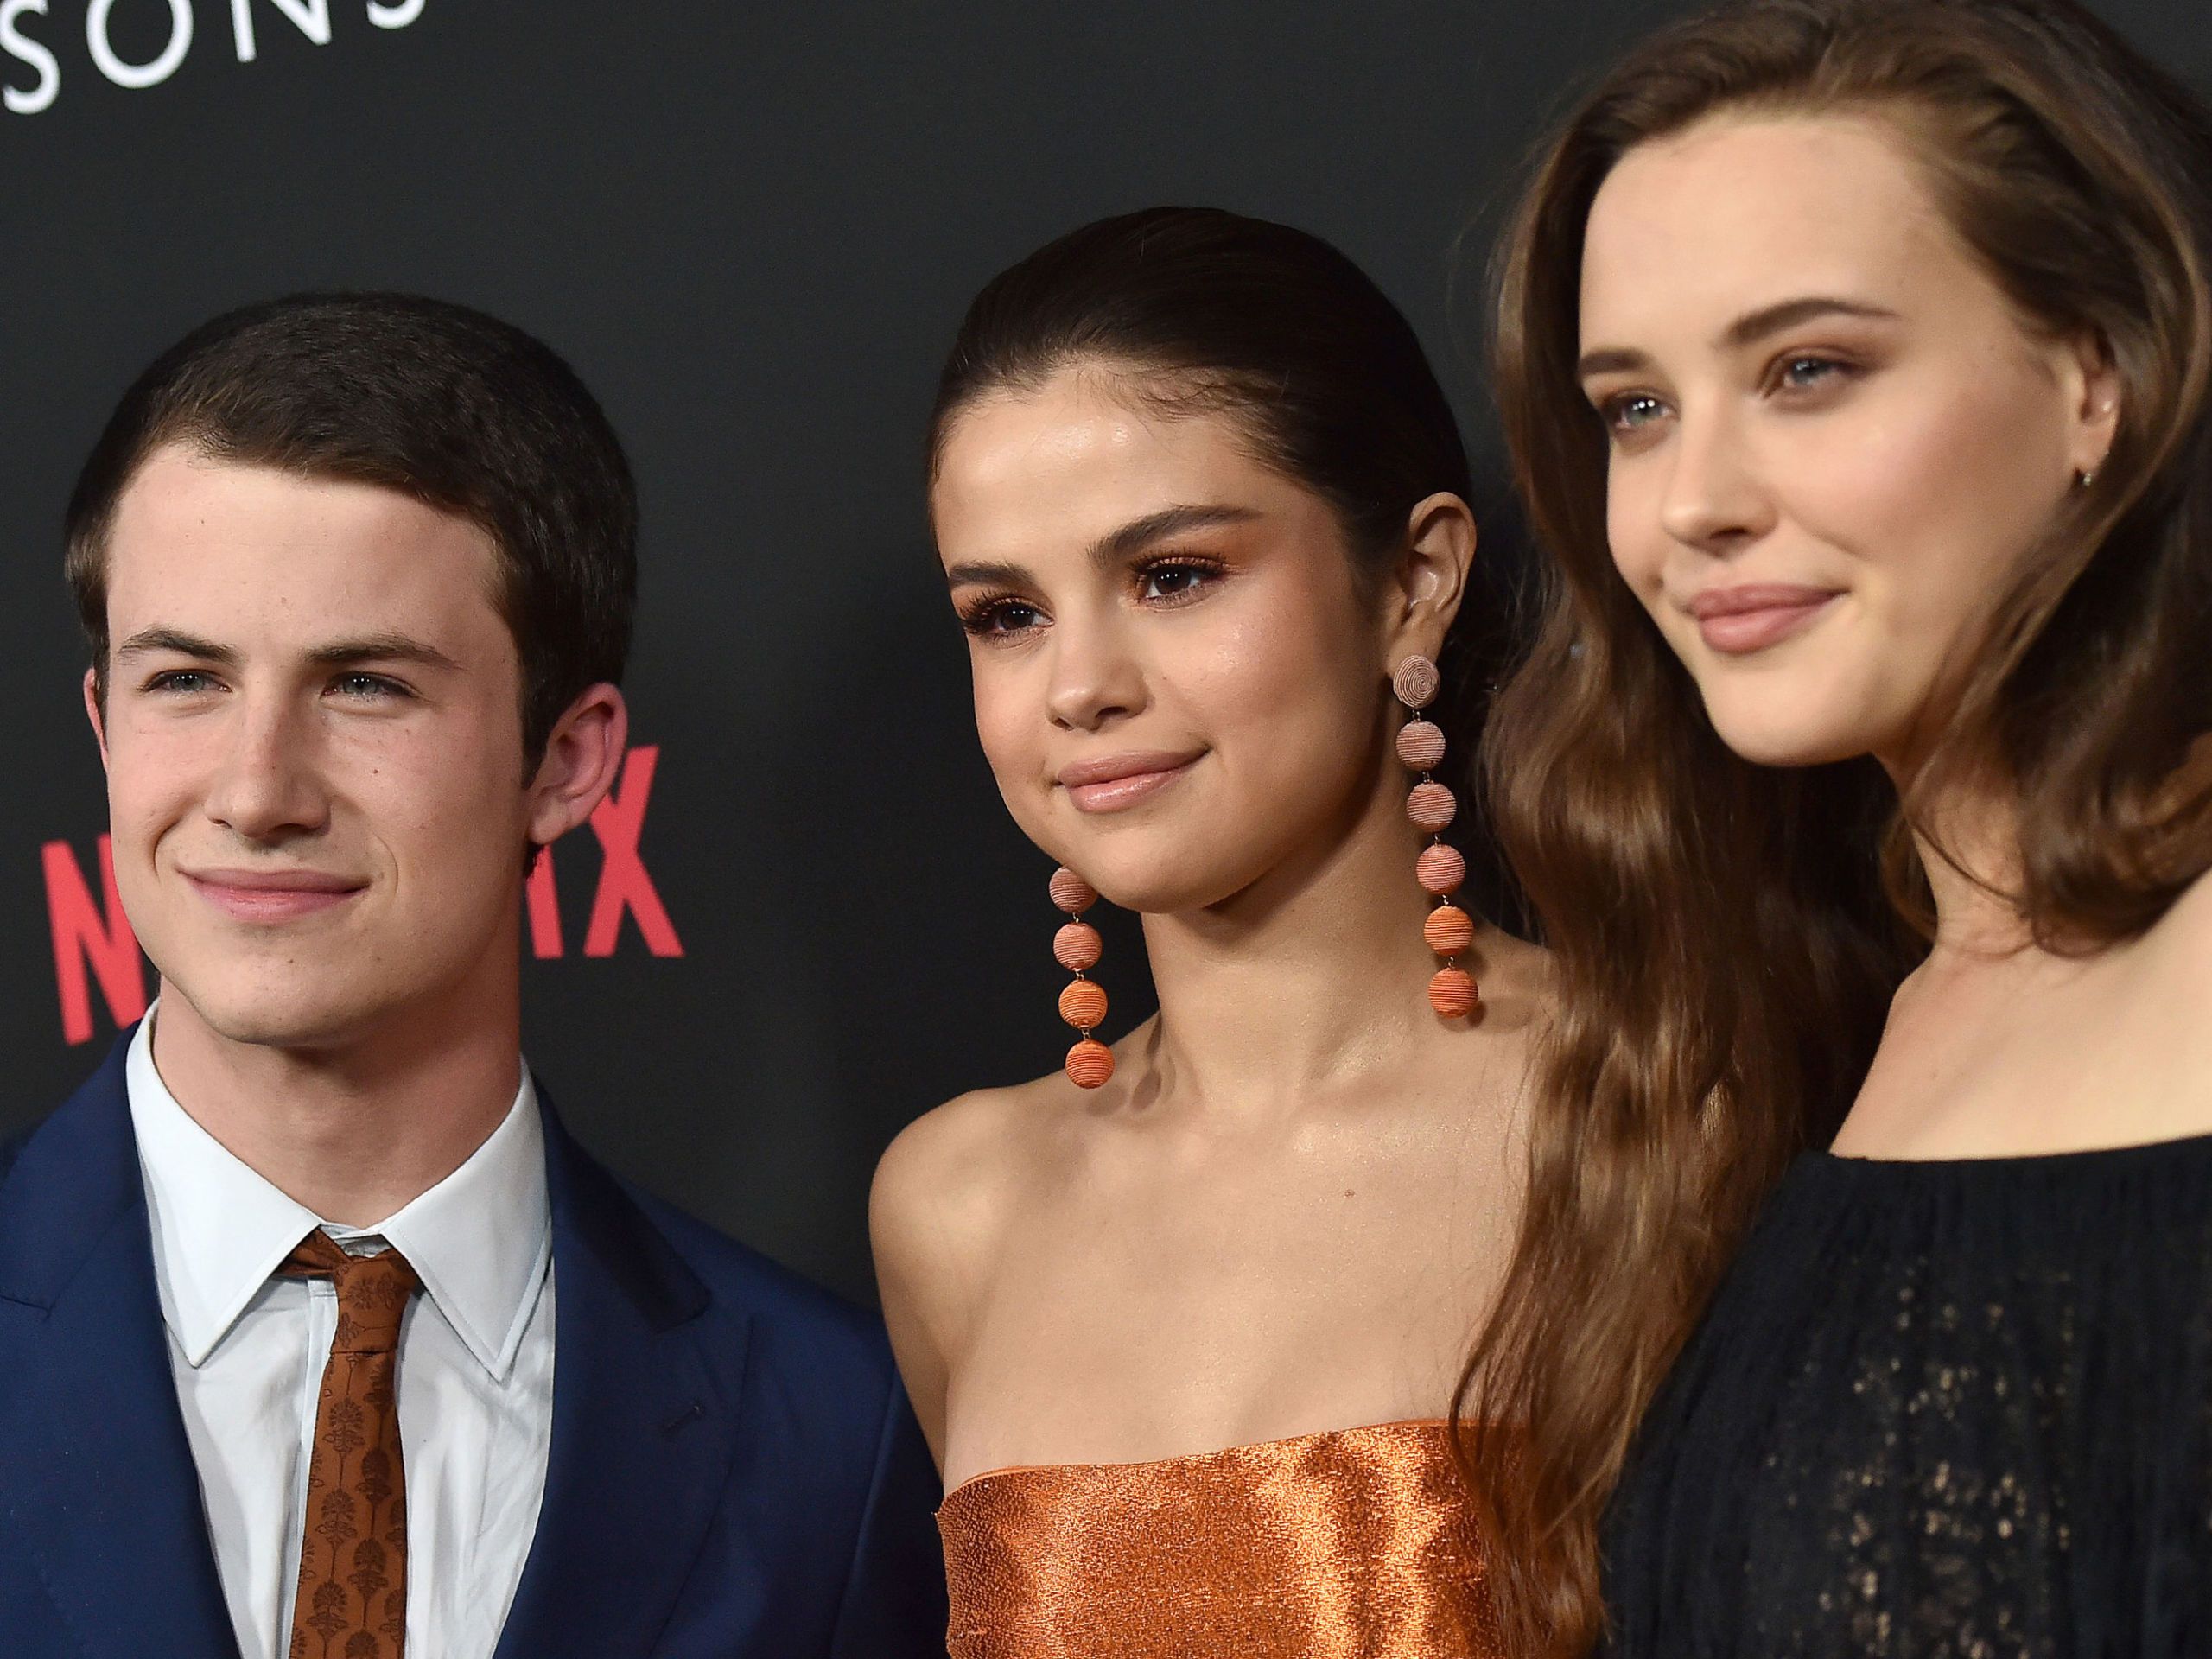 13 Reasons Why season 3: Showrunner reveals if Hannah would be involved